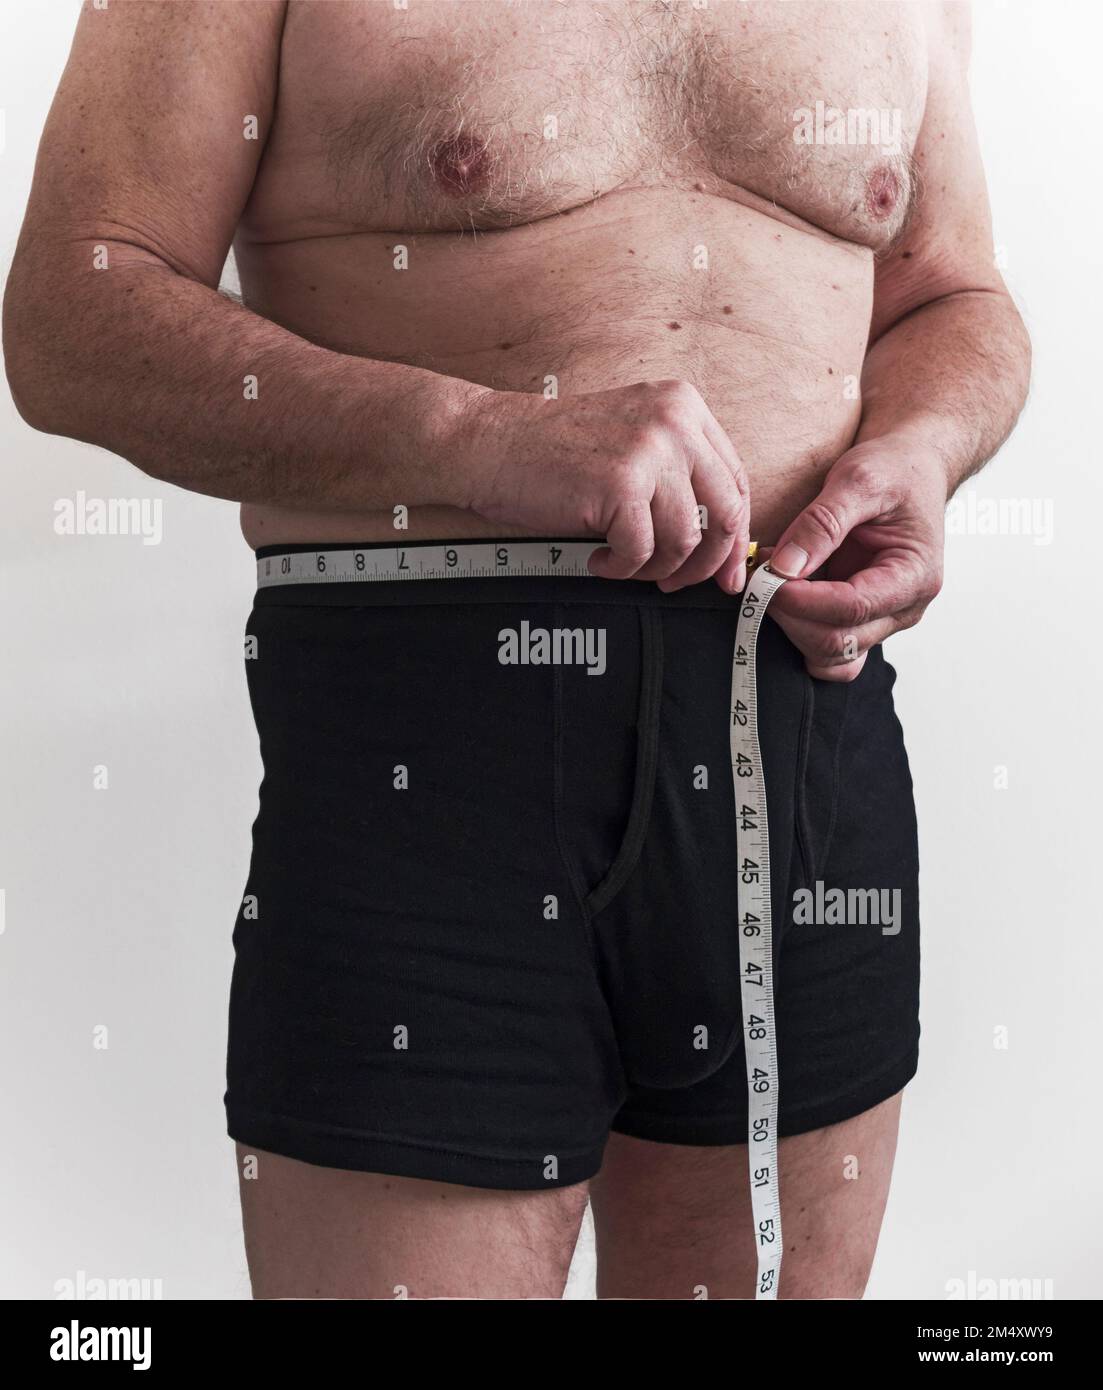 Mature male in boxer shorts measures his waist with a tape measure Stock Photo